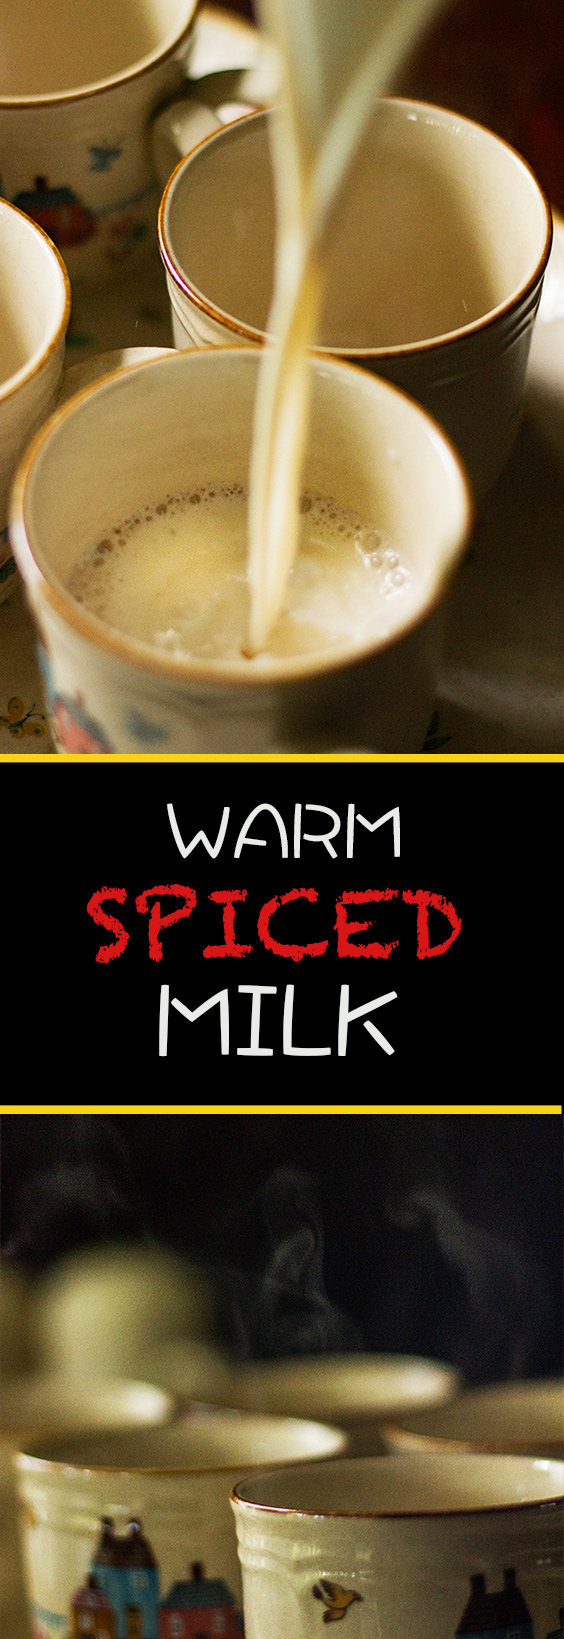 Spiced vanilla milk with honey recipe is the perfect start to any day.Not only a winter drink but for days when you need a extra comforting hug in a mug.